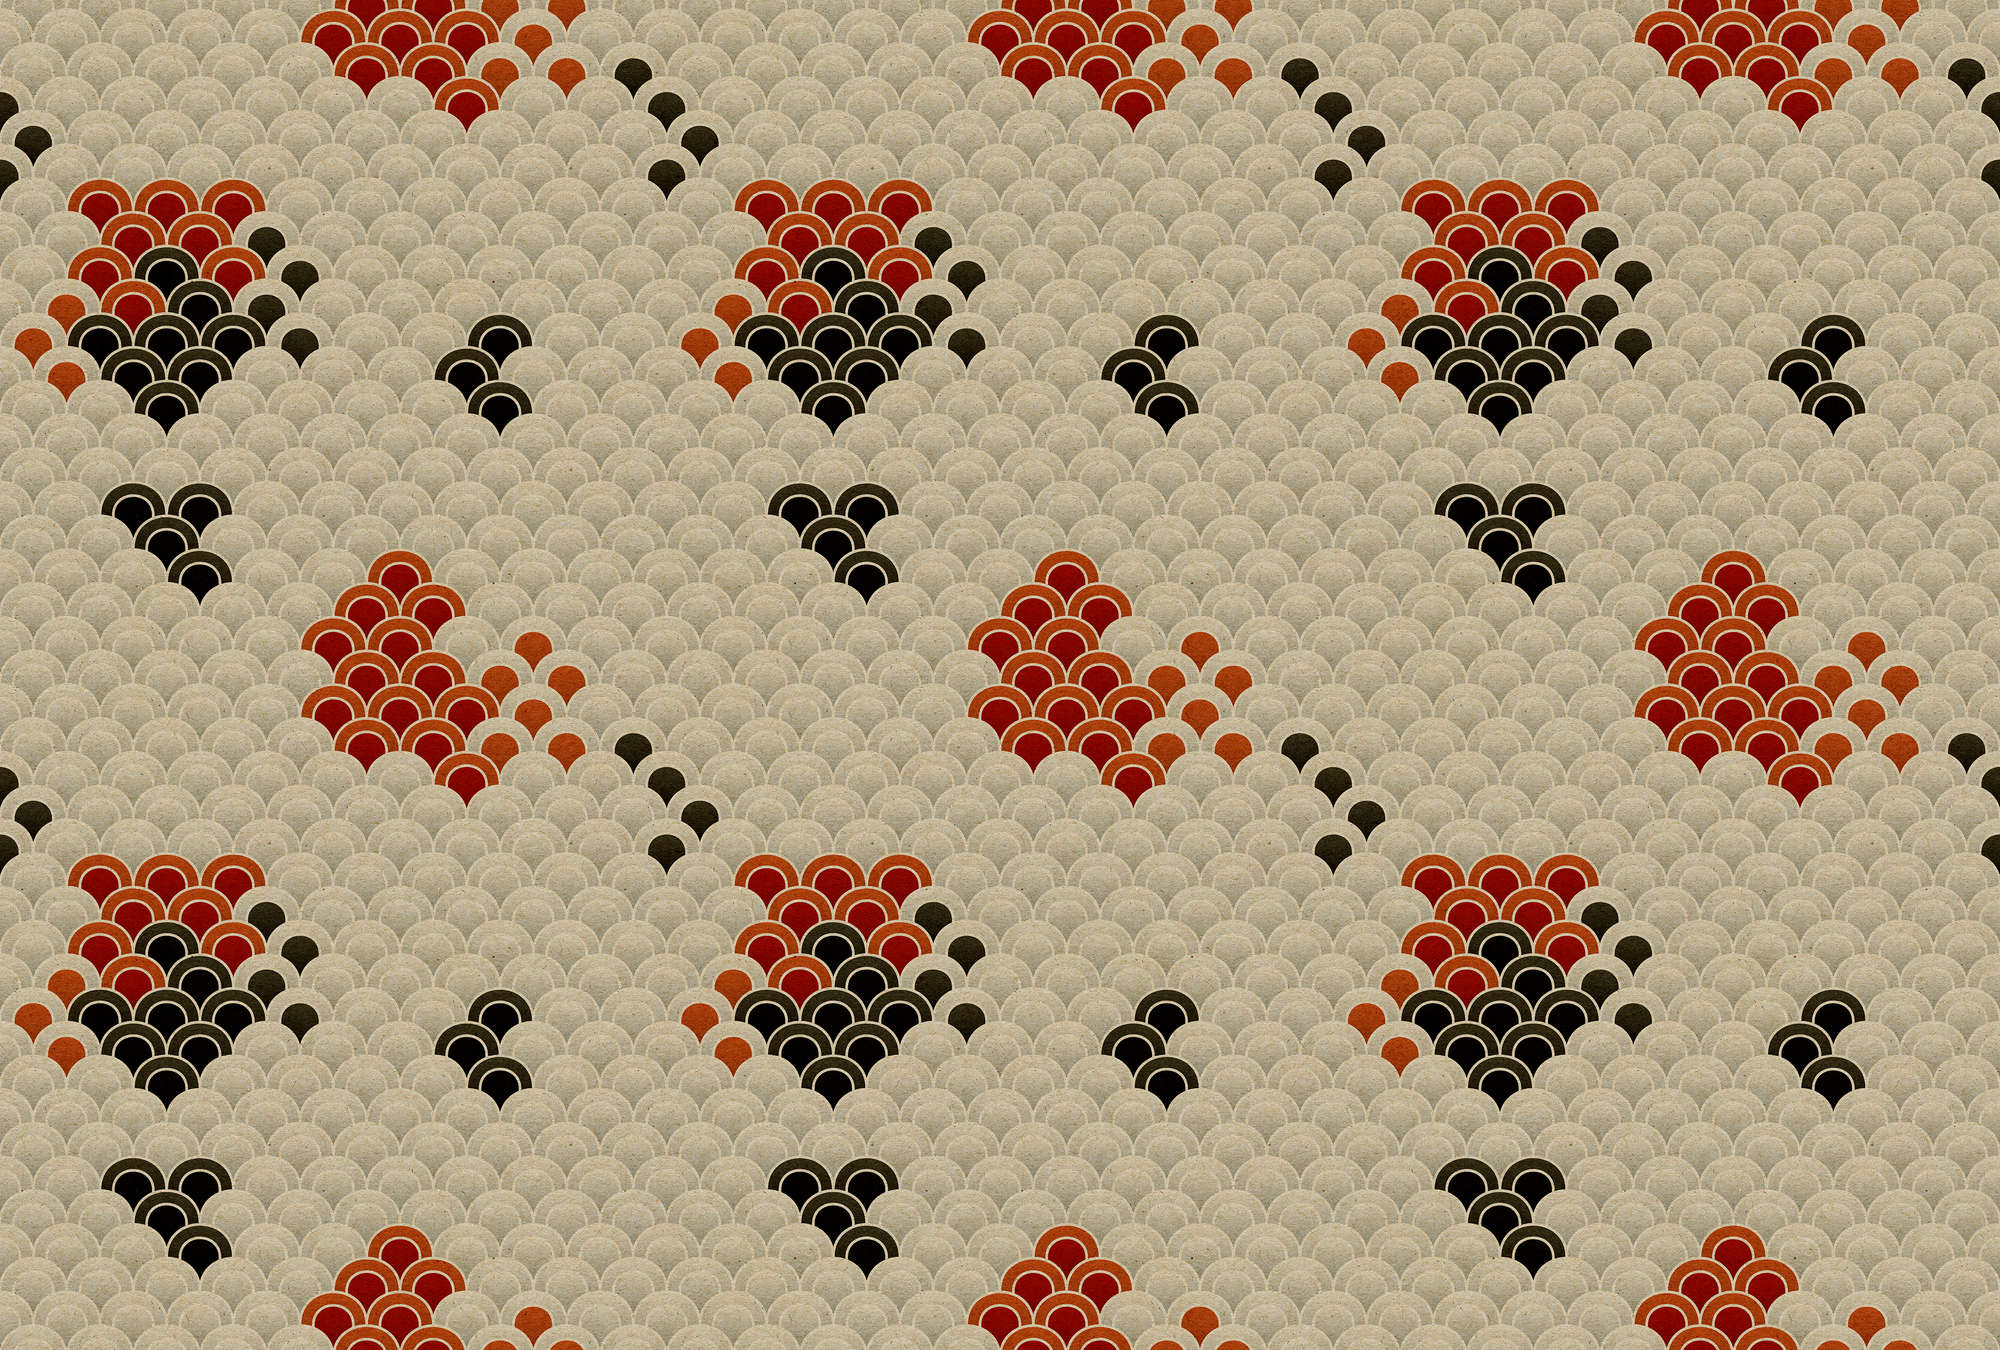             Koi 2 - Koi Digital Print on Cardboard Structure, Abstract & Stylised - Beige, Red | Structure Non-woven
        